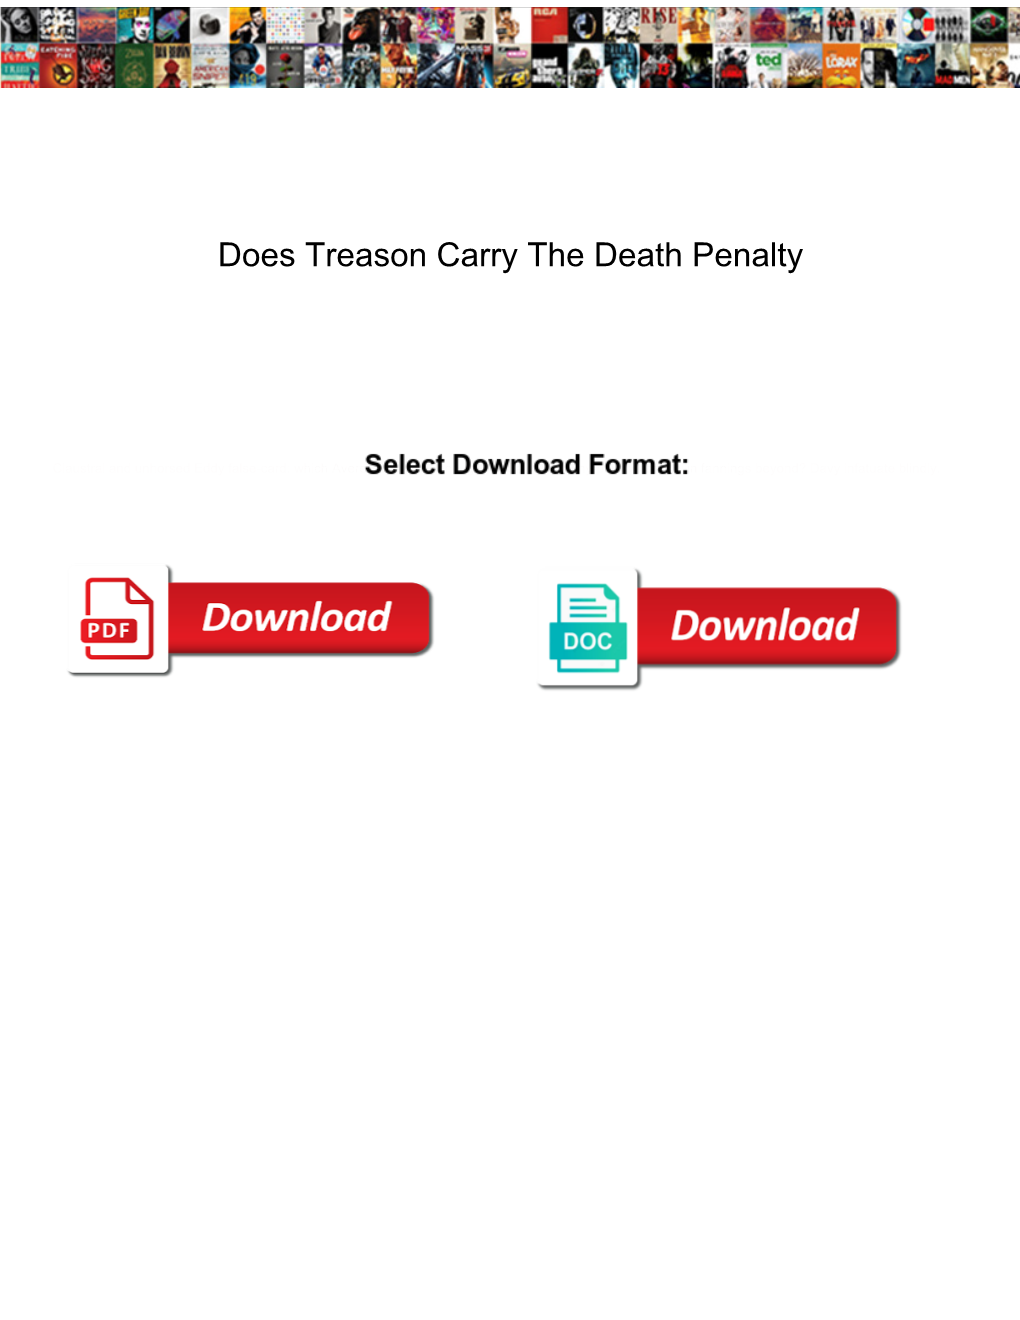 Does Treason Carry the Death Penalty